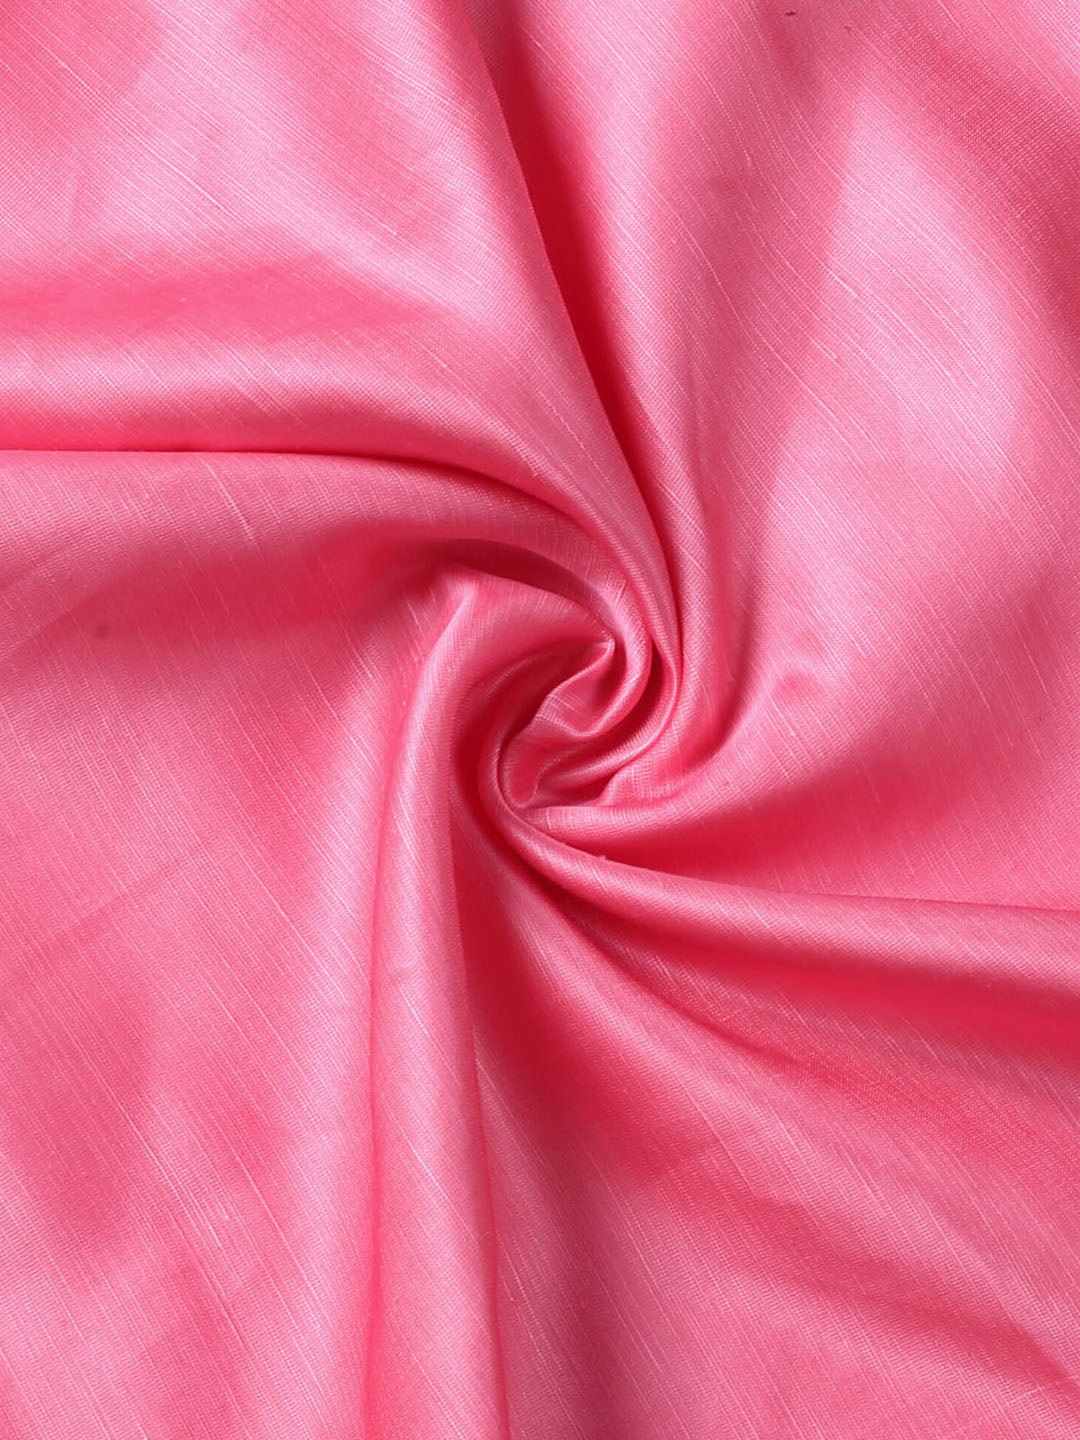 Soothing Rose Pink Satin Linen Fabric